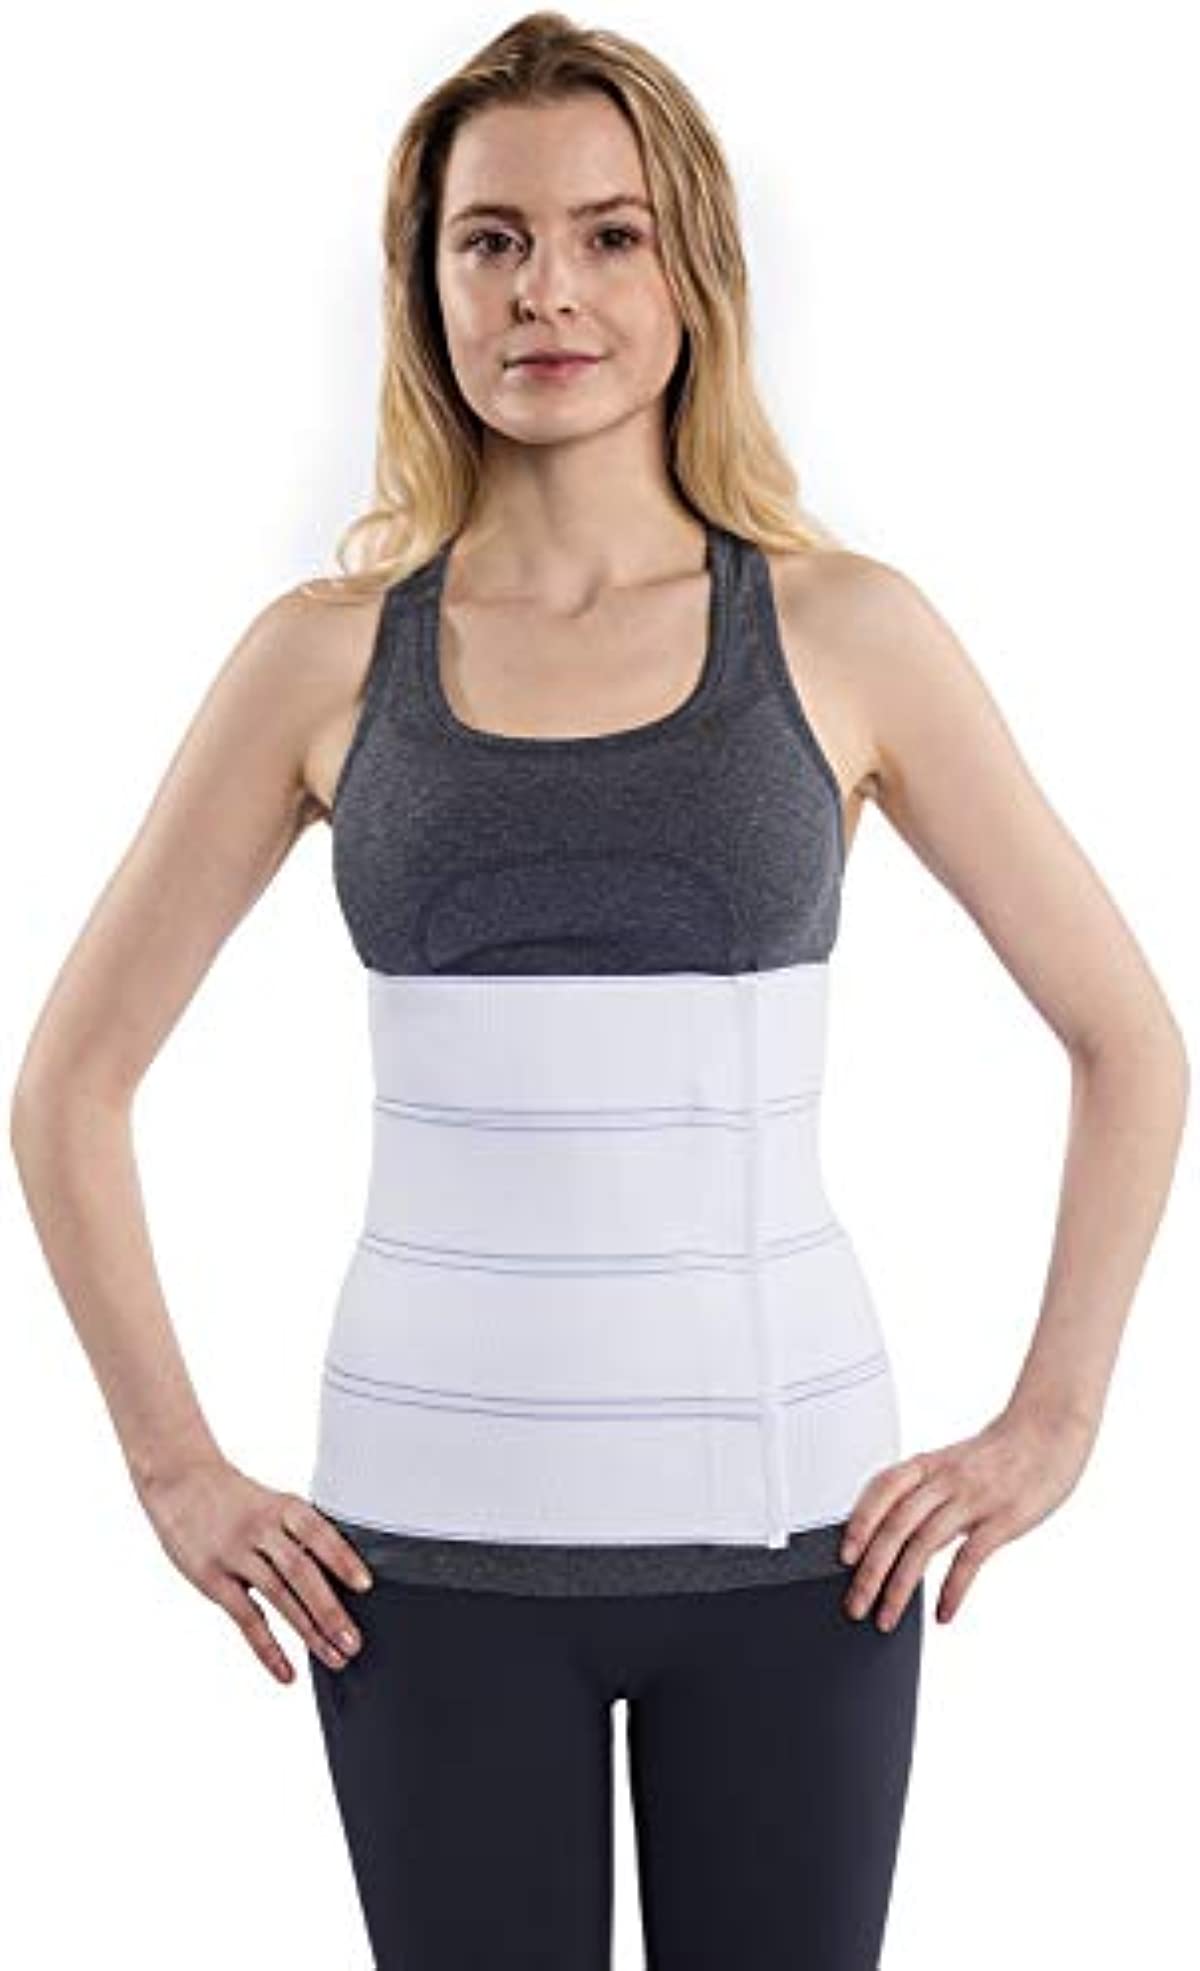 NYOrtho Abdominal Binder Lower Waist Support Belt - Compression Wrap for Men and Women (75\" - 90\") 4 Panel - 12\"